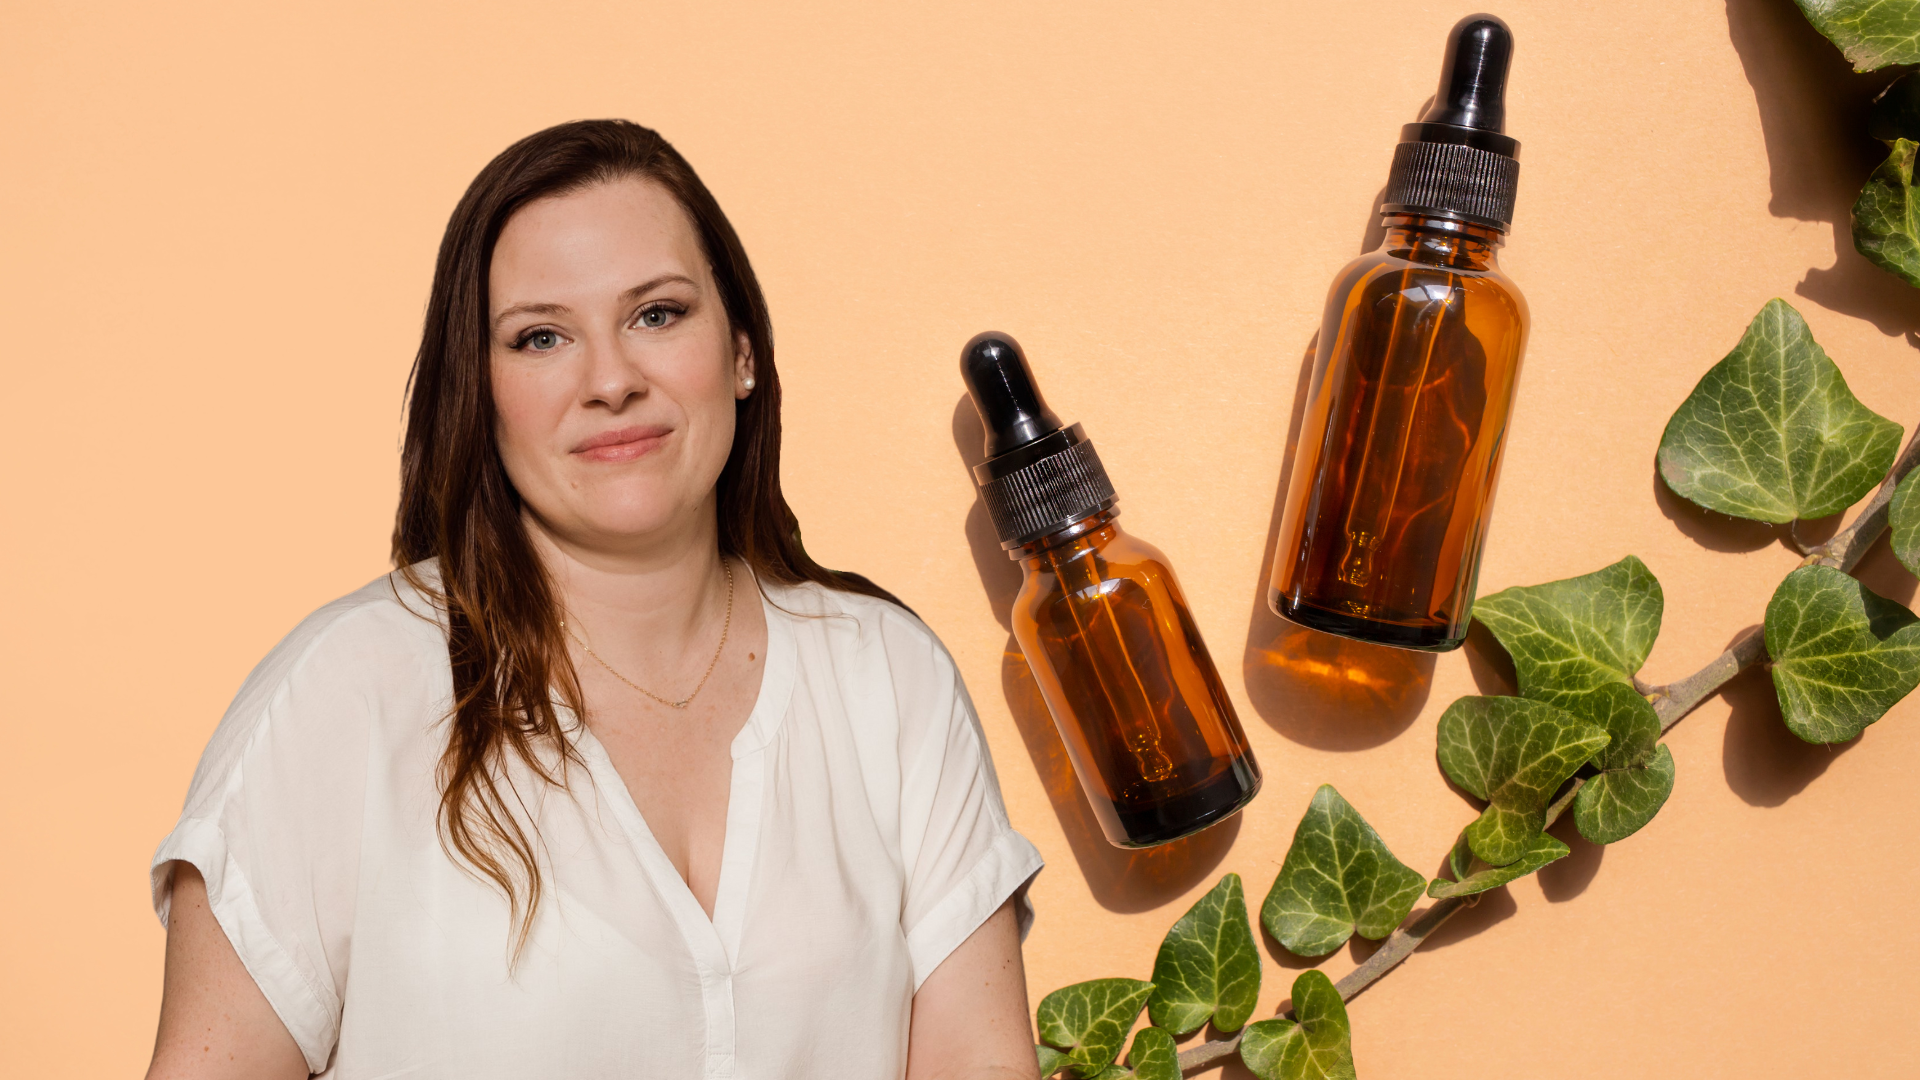 Naturopathic Physician and Herbalist Dr. LaDonna Rocha